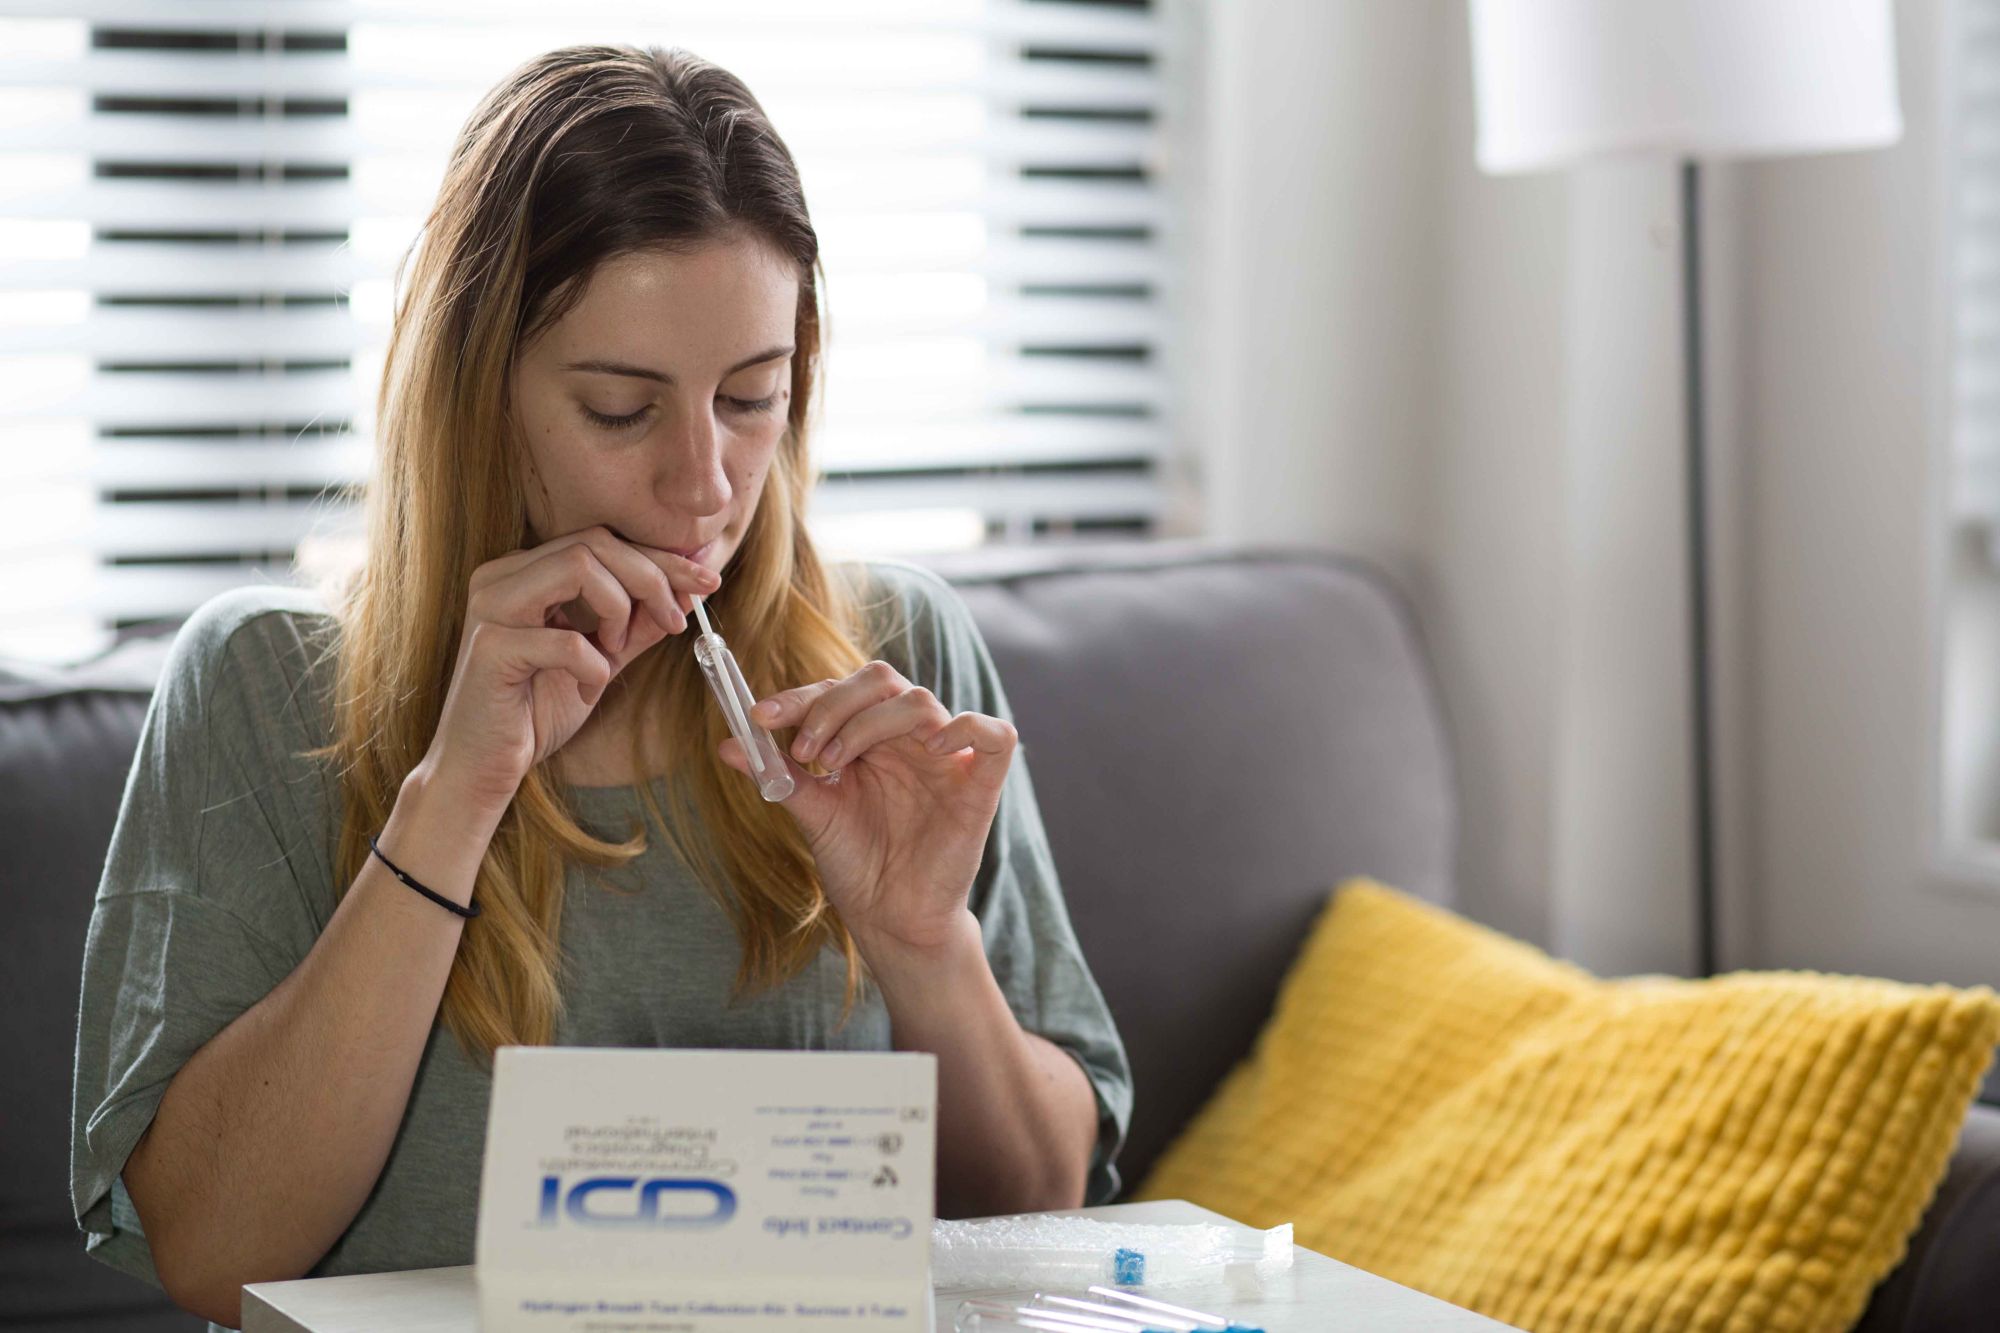 Non-invasive at-home breath test from CDI